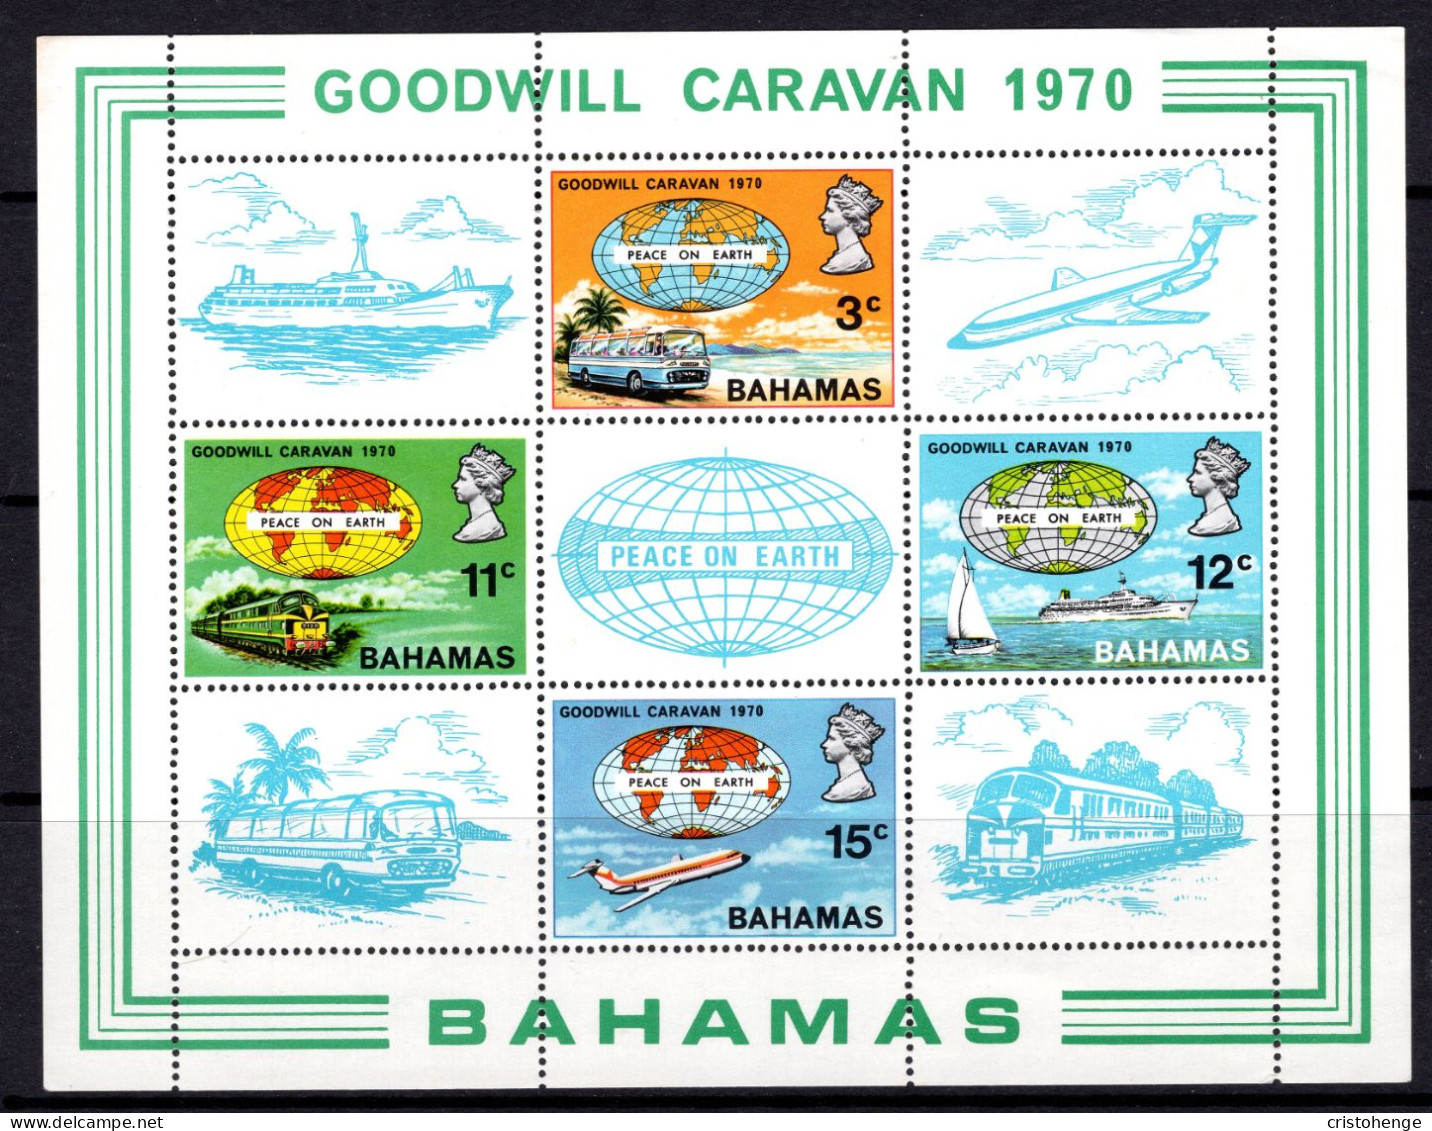 Bahamas 1970 Goodwill Caravan MS MNH (SG MS351) - 1963-1973 Ministerial Government